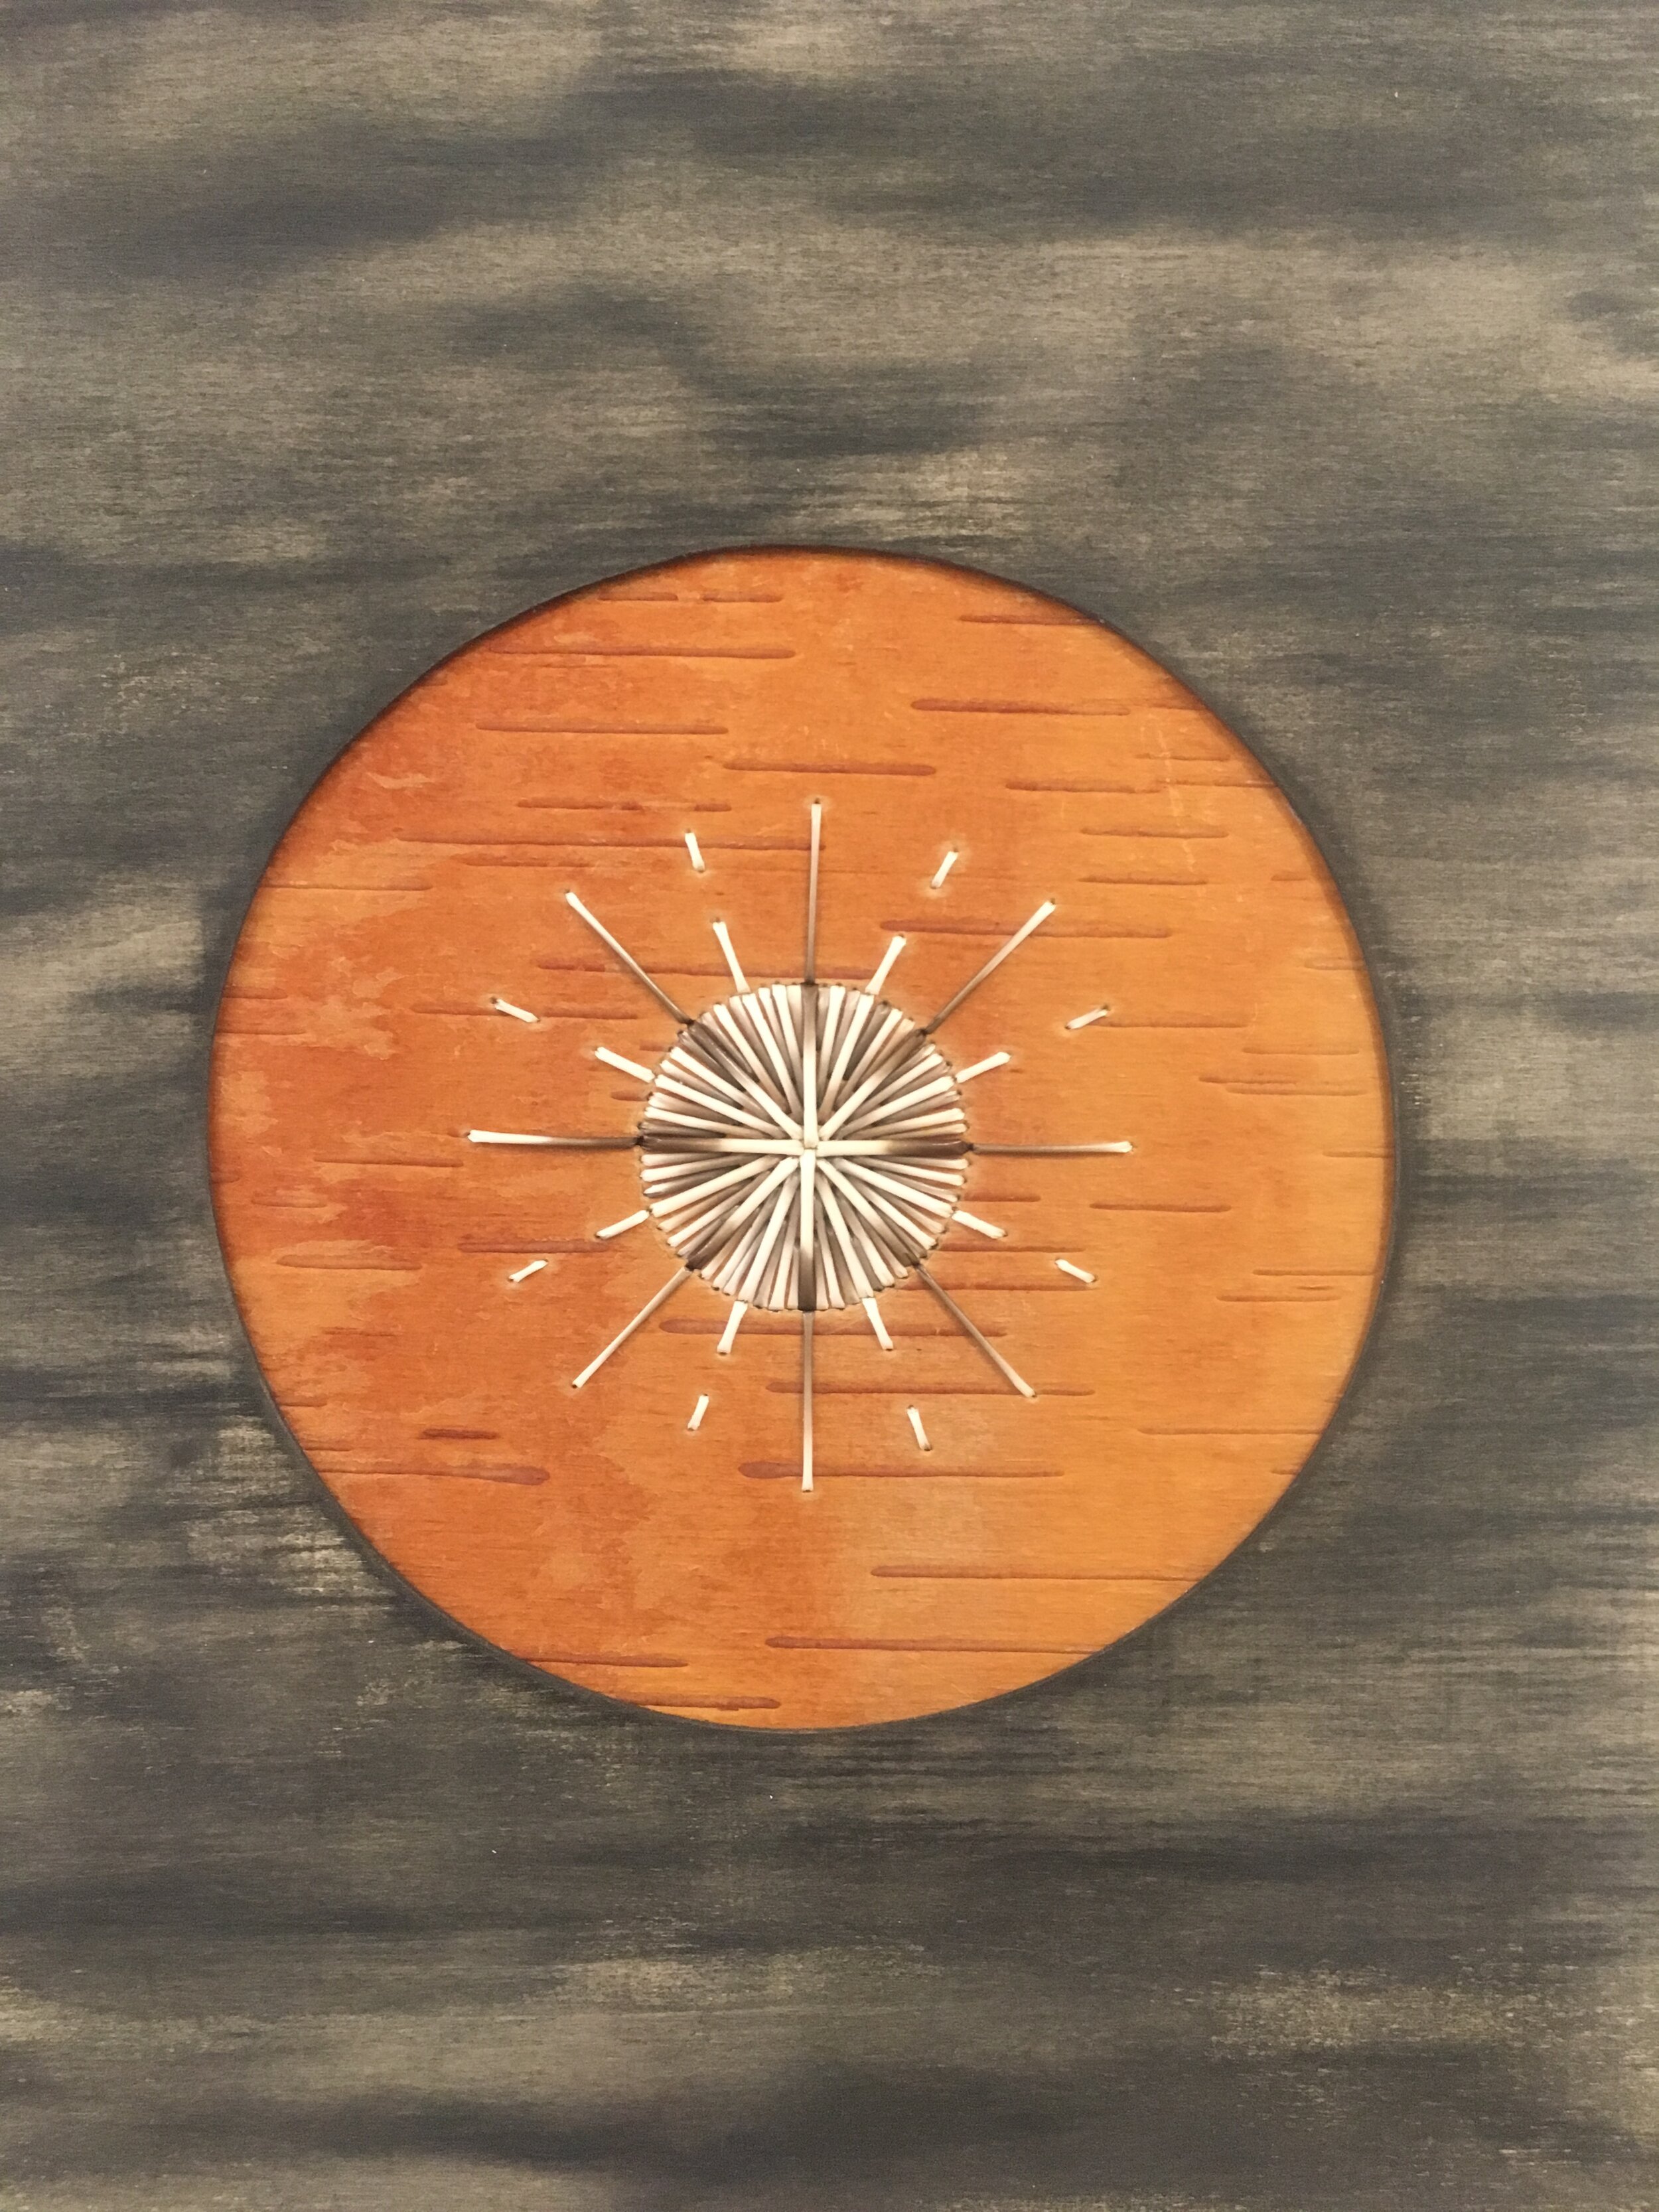 $700.00, Mona She Sines At Night - 10"x 8", found porcupine quills, birch bark on wood panel